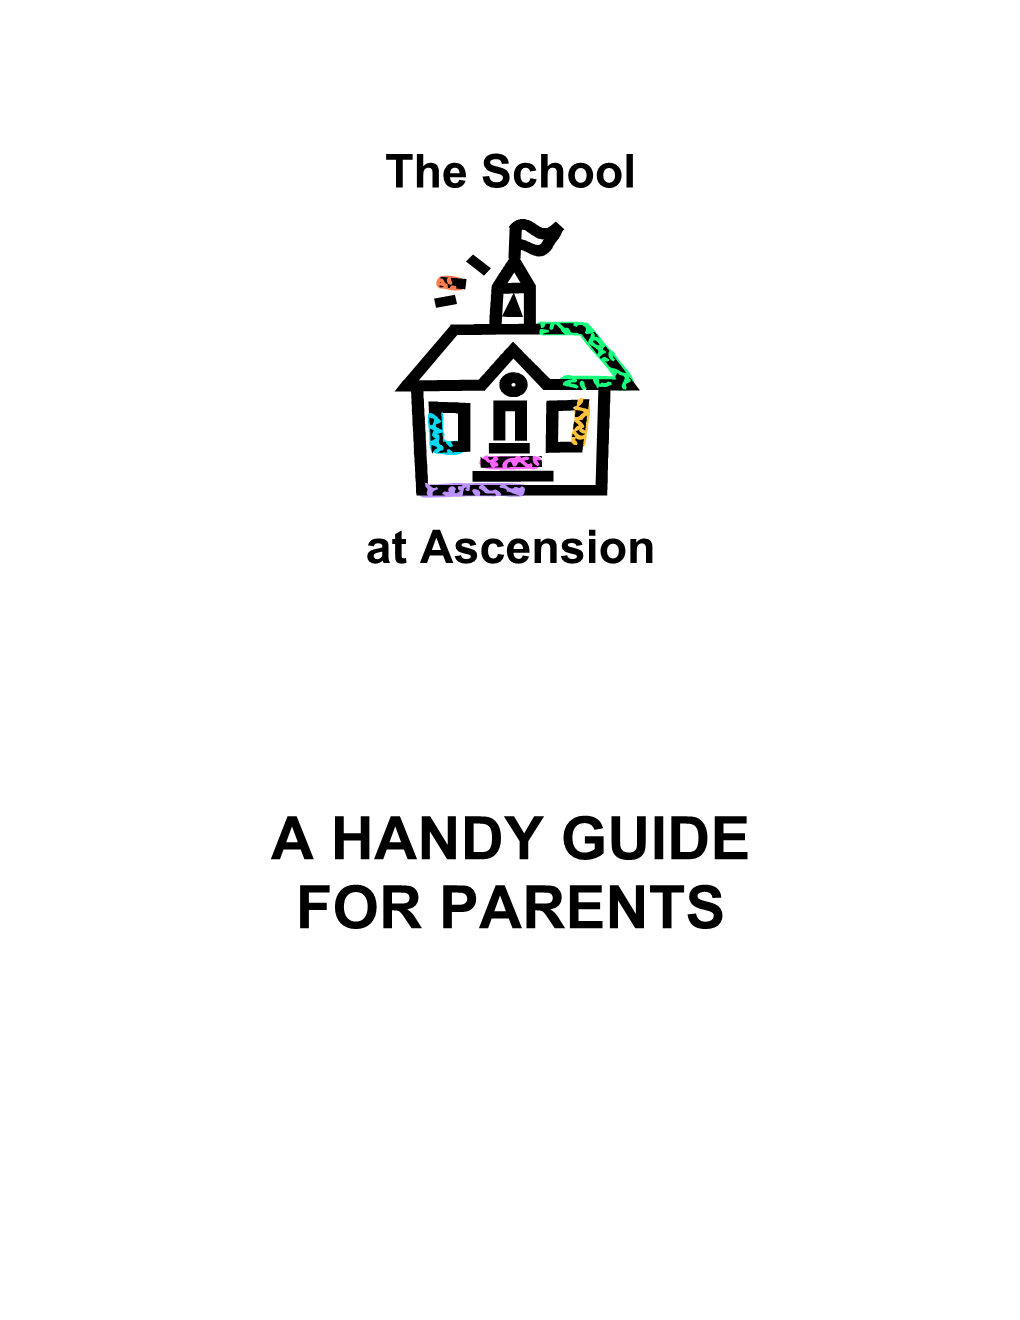 The Preschool at Ascension Episcopal Church and Holy Trinity's Handy Guide for Parents